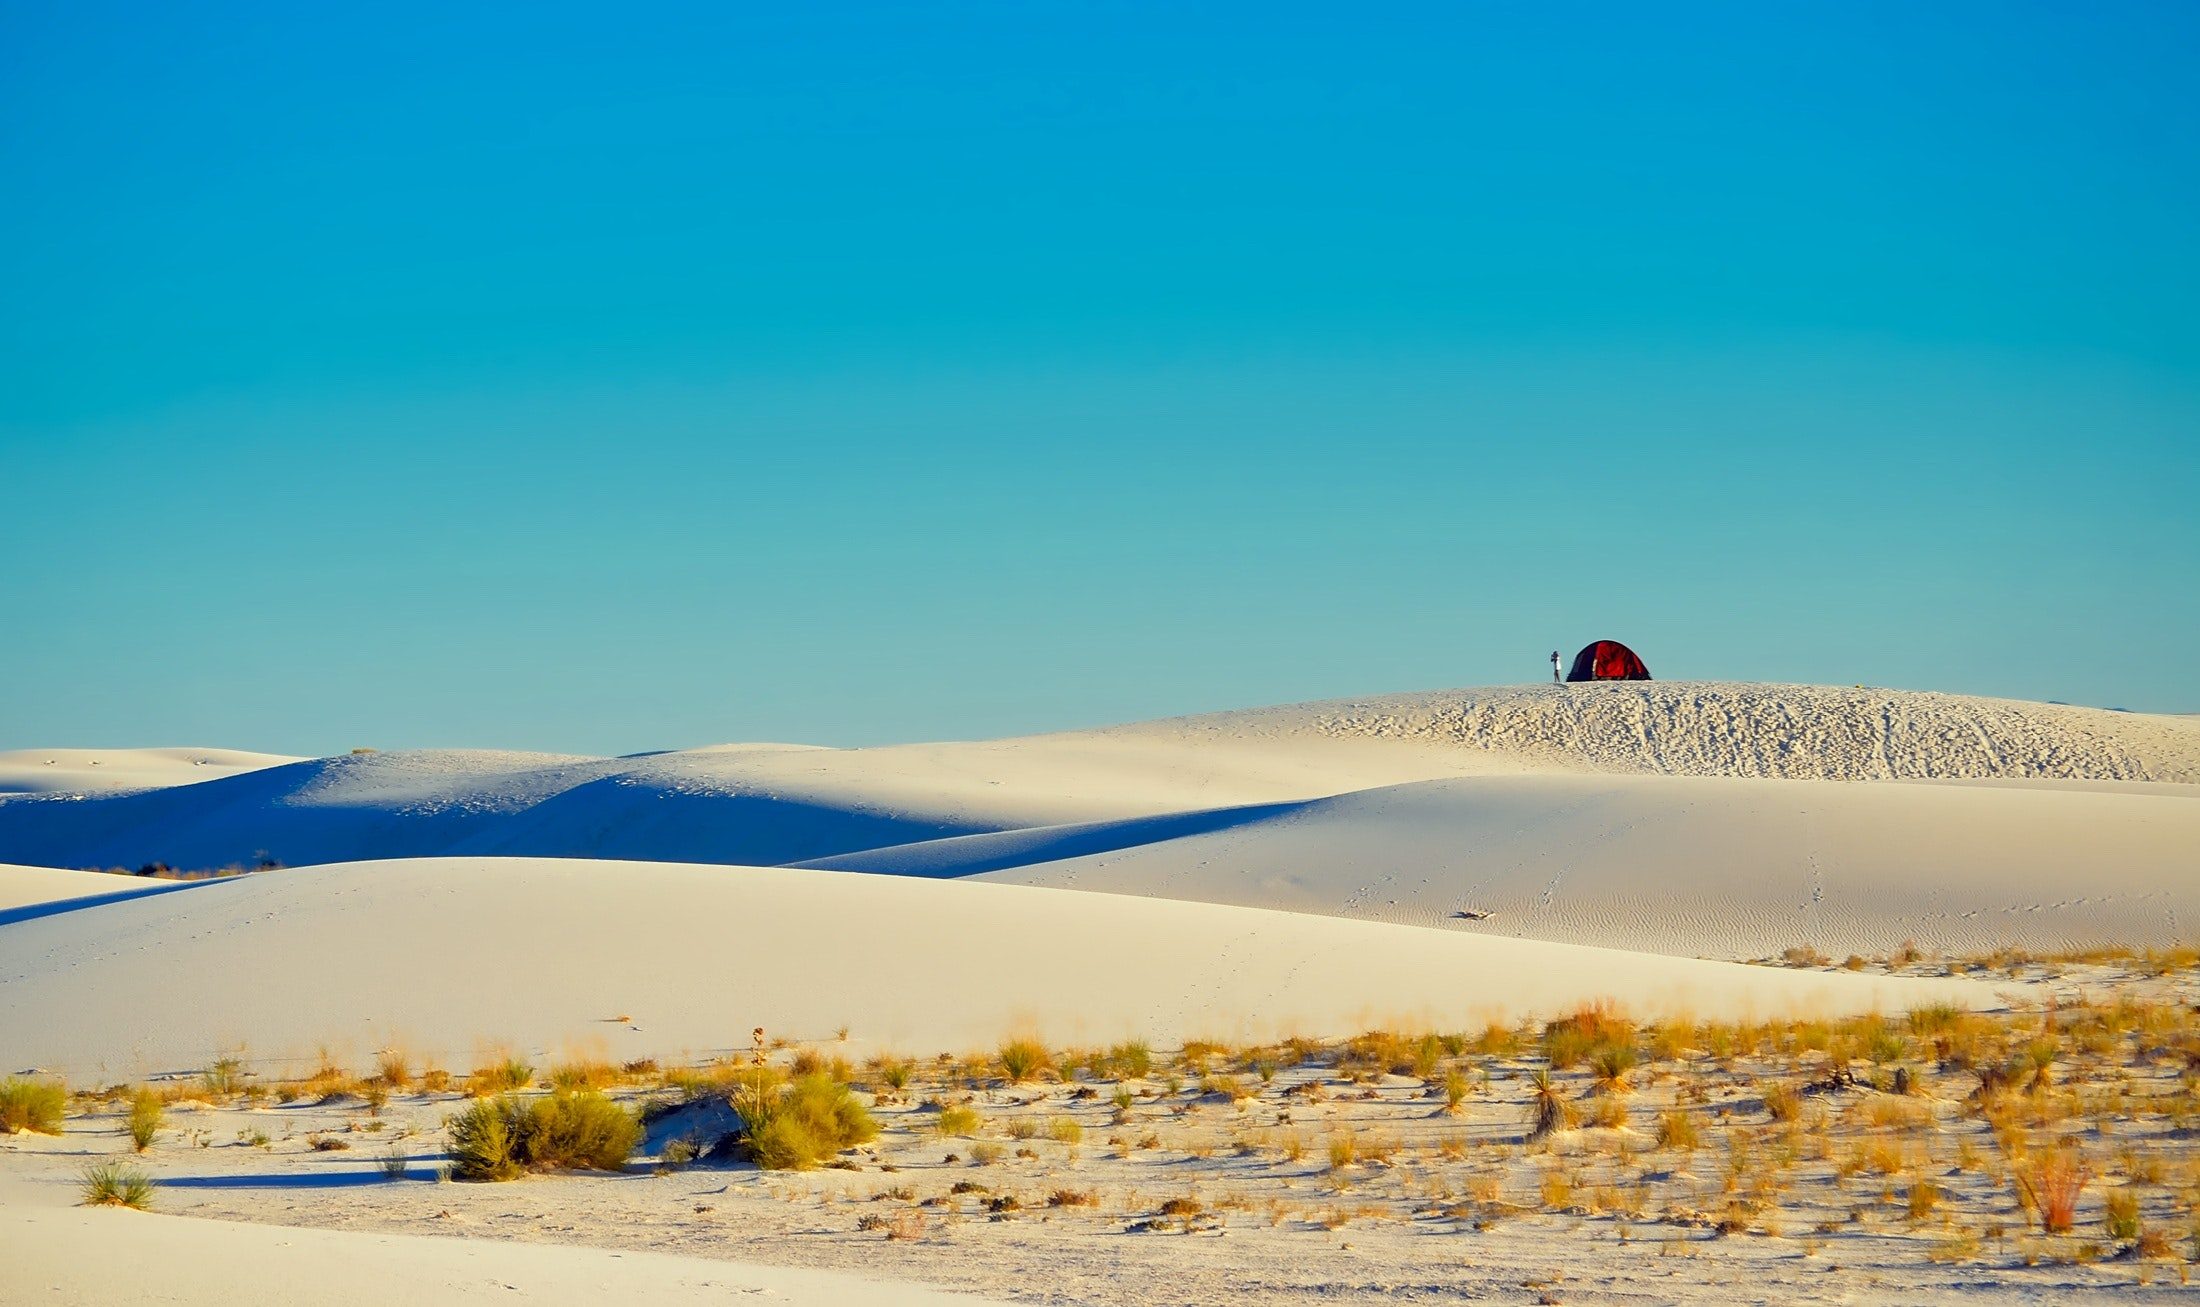 First time camping? Here’s all you need to hit the dunes this camping season